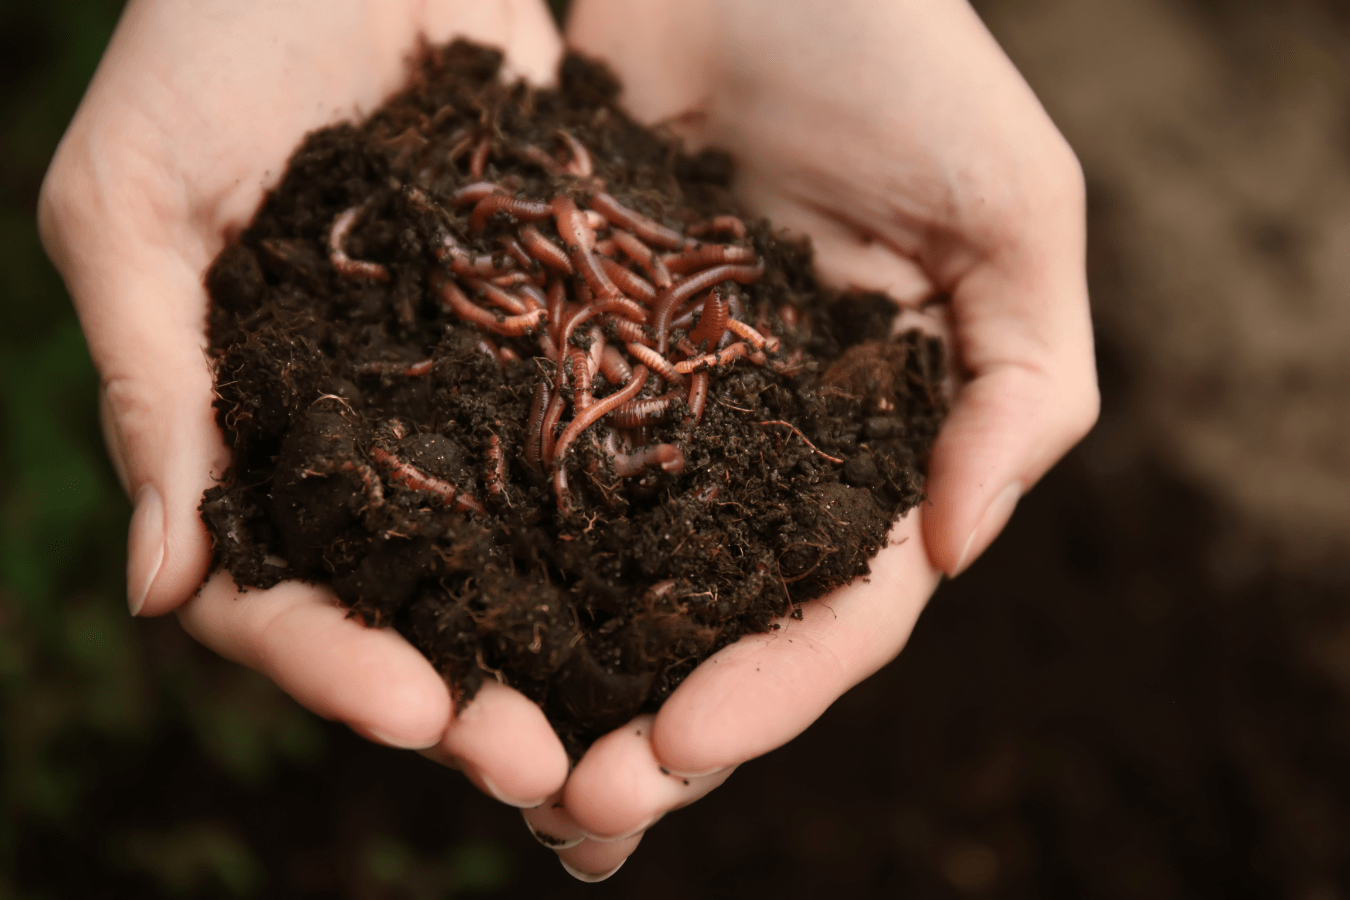 Dream About Worms: What Does It Mean?